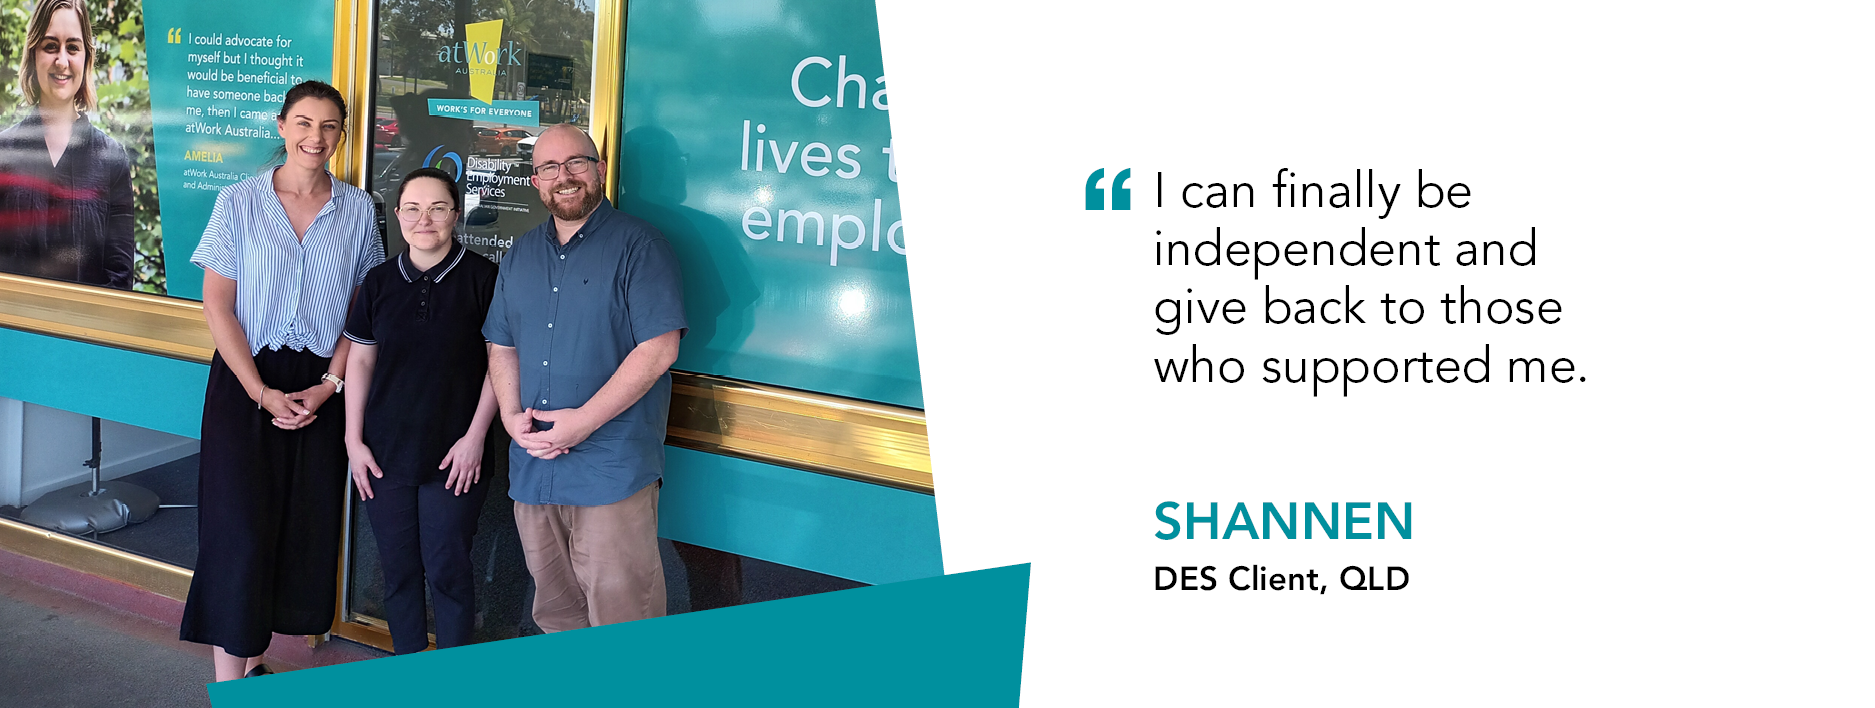 Quote reads "I can finally be independent and give back to those who supported me." said Shannen, DES Client Queensland